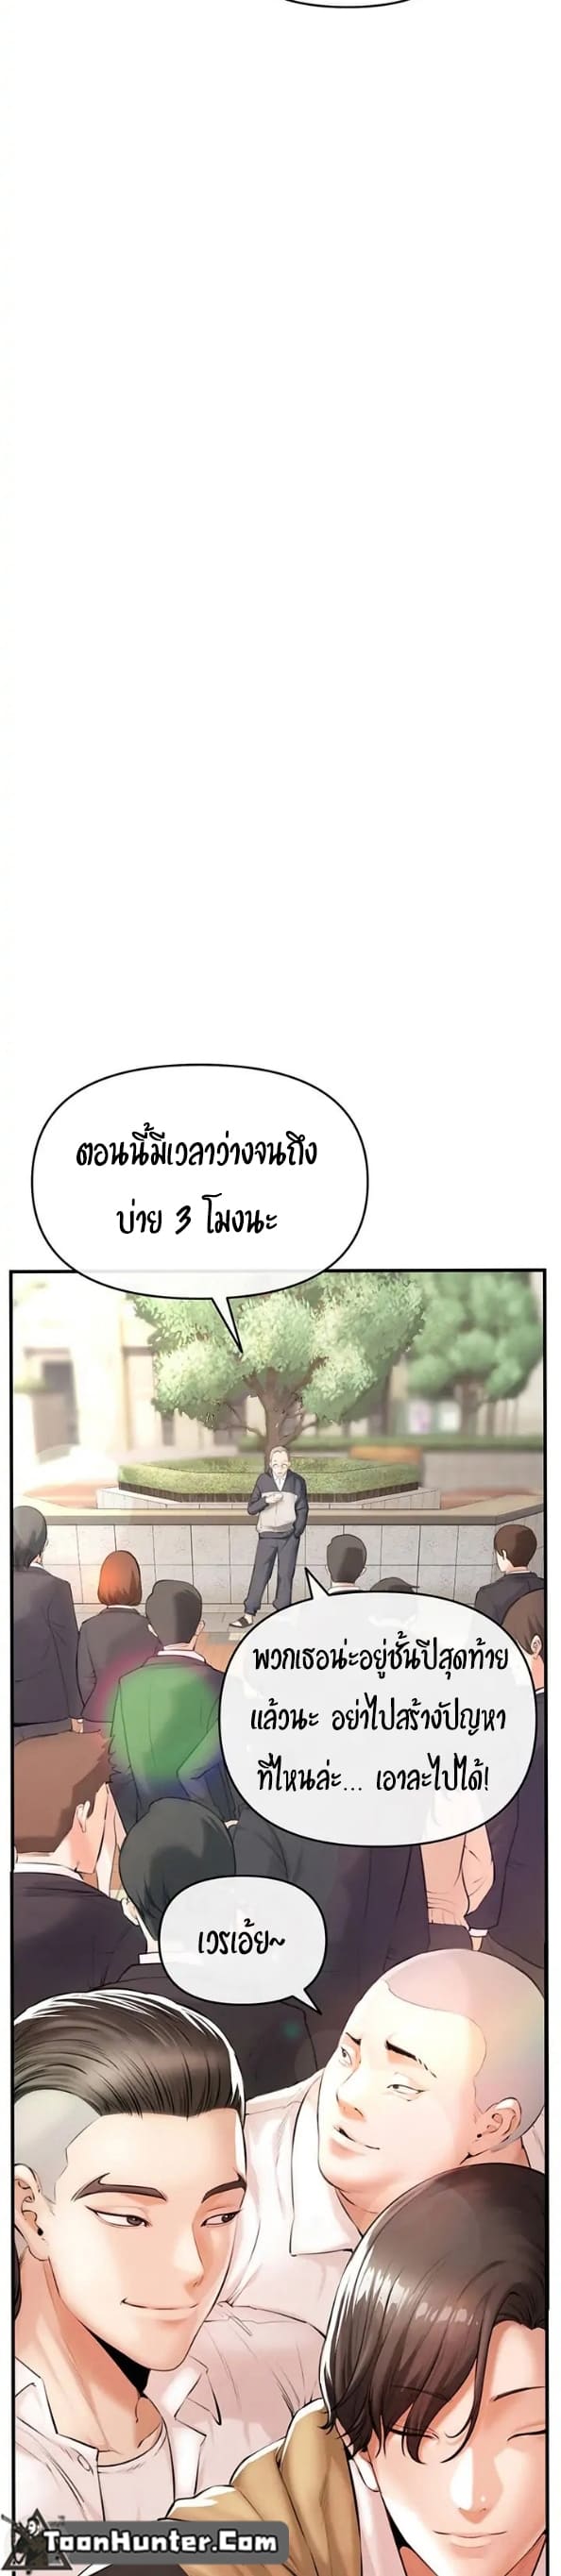 The Real Deal ตอนที่ 1 ภาพ 35